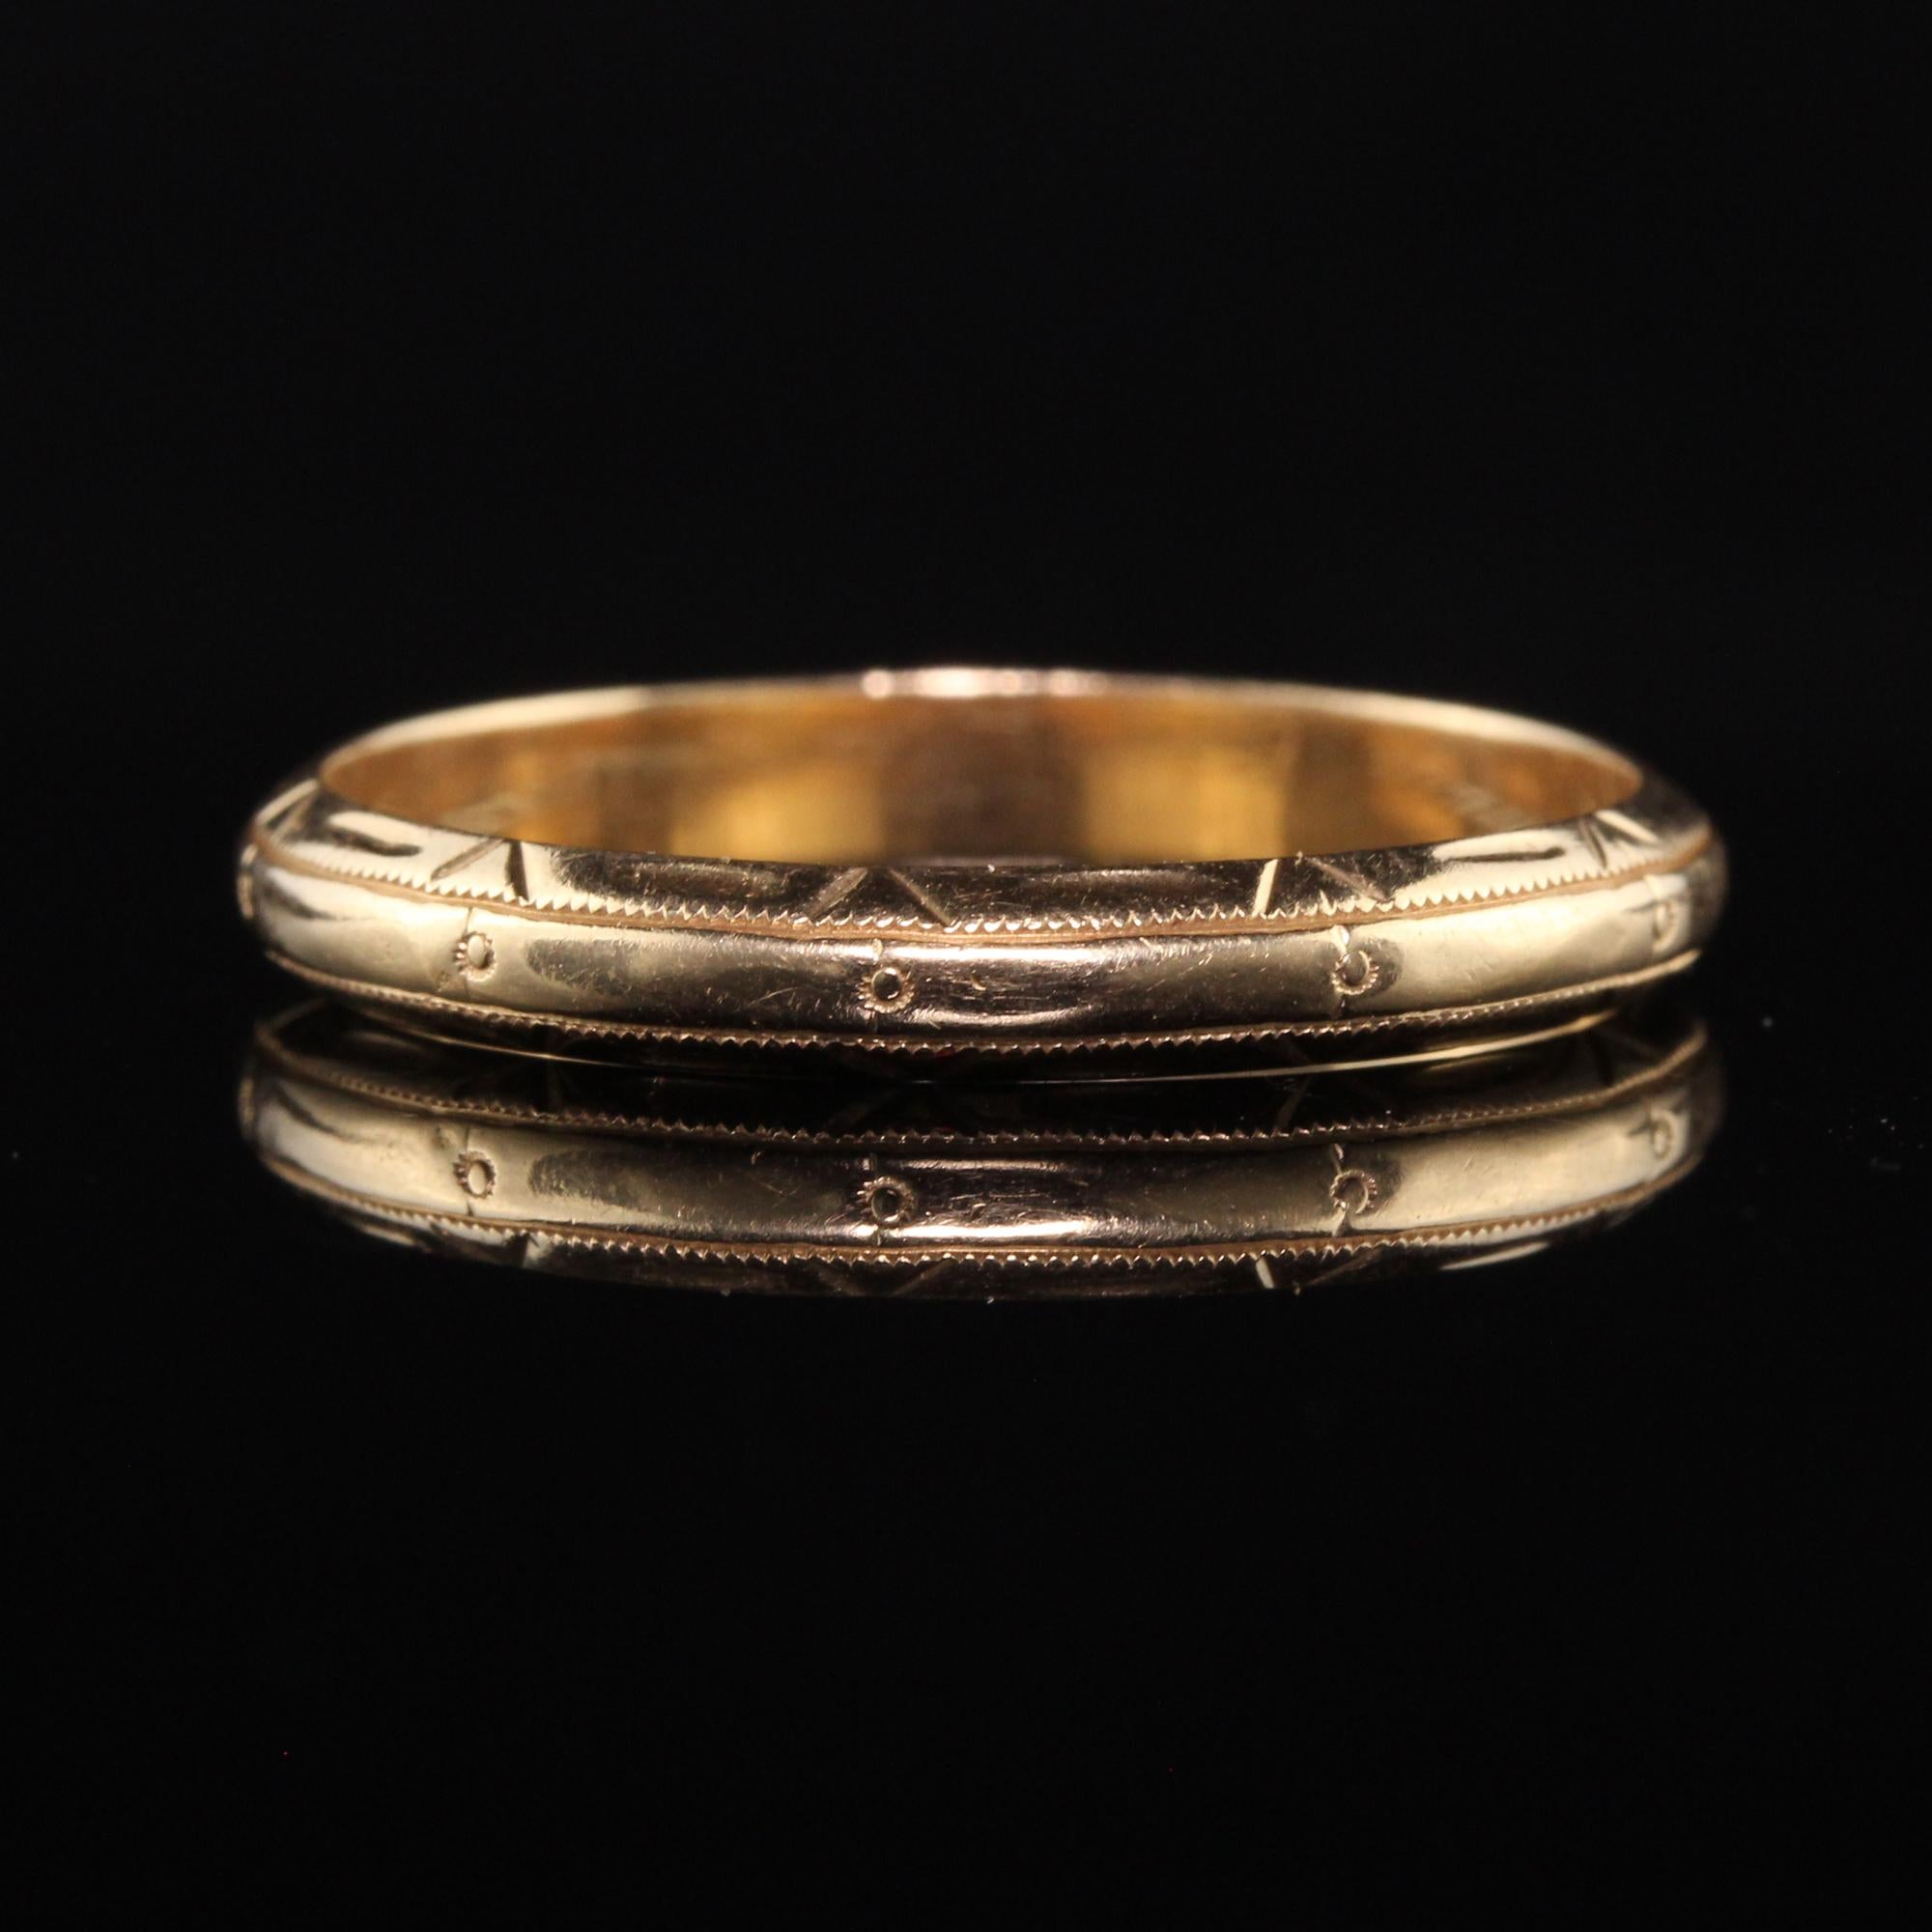 Antique Art Deco 14K Yellow Gold Engraved Wedding Band In Good Condition For Sale In Great Neck, NY